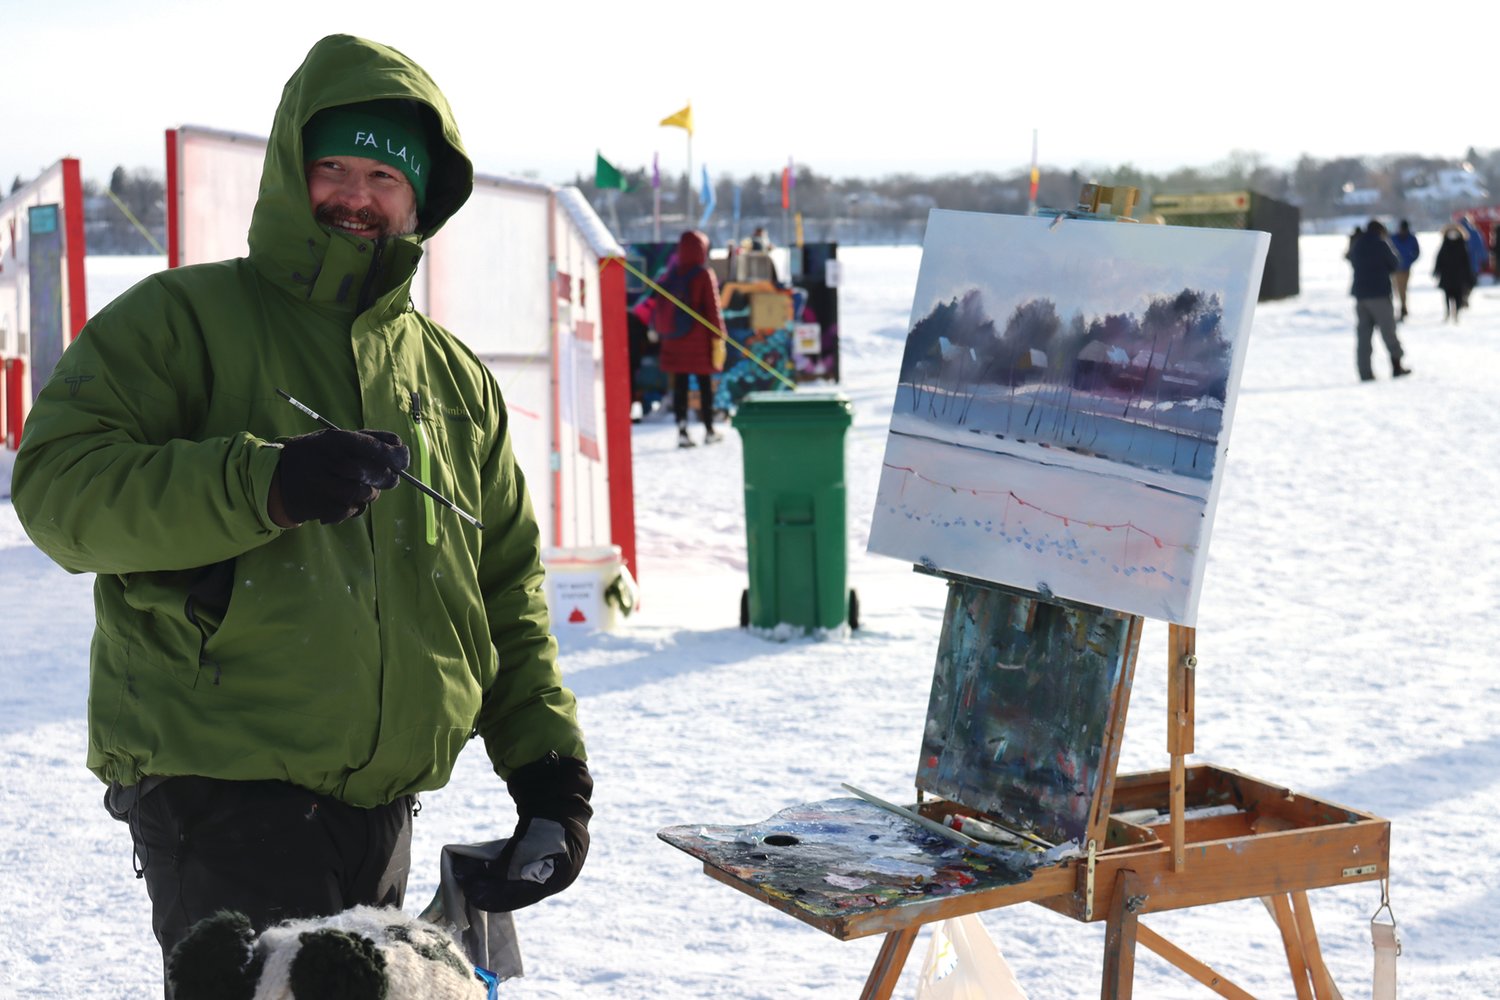 Tadas Kosciuska paints on-ice at Bde Unma /Lake Harriet for the first time on Sunday, Jan. 23, 2022. He’s a member of the Outdoor Painters of Minnesota, which arranges group paint-outs at scenic locations. (Photo by Tesha M. Christensen)